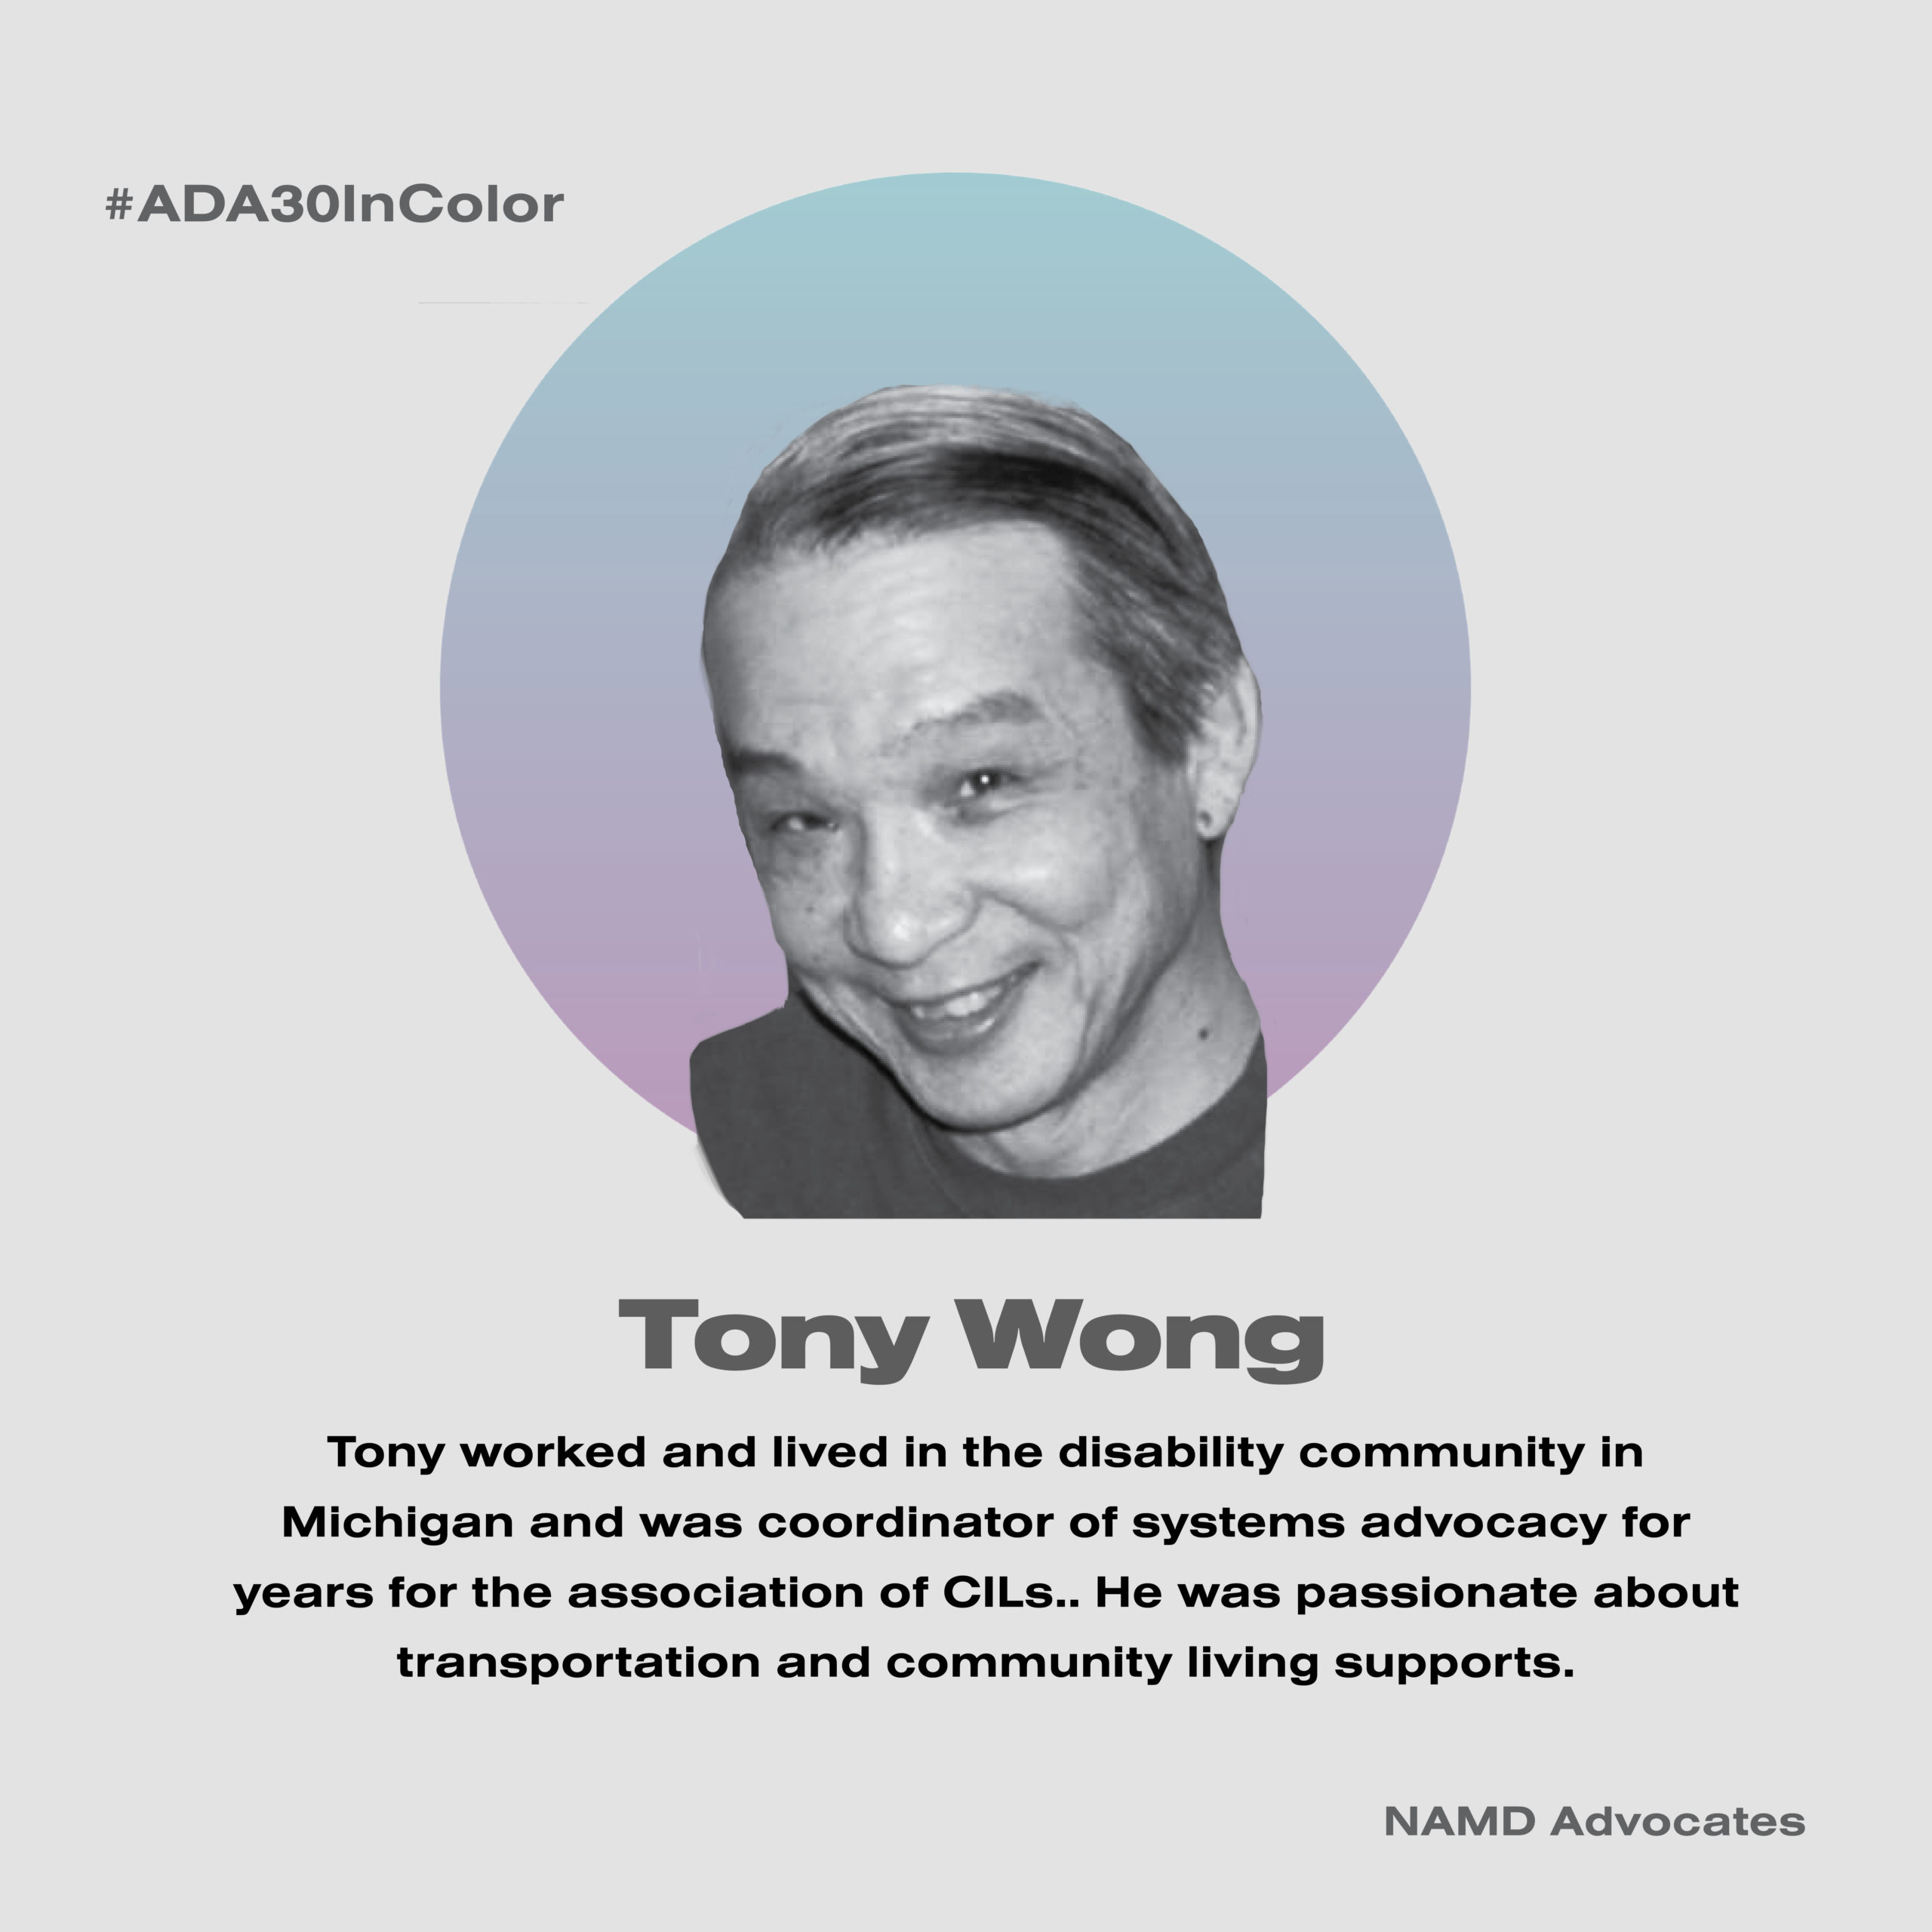 Tony Wong. Tony worked and lived in the disability community in Michigan and was coordinator of systems advocacy for years for the association of CILs. He was passionate about transportation and community living supports.